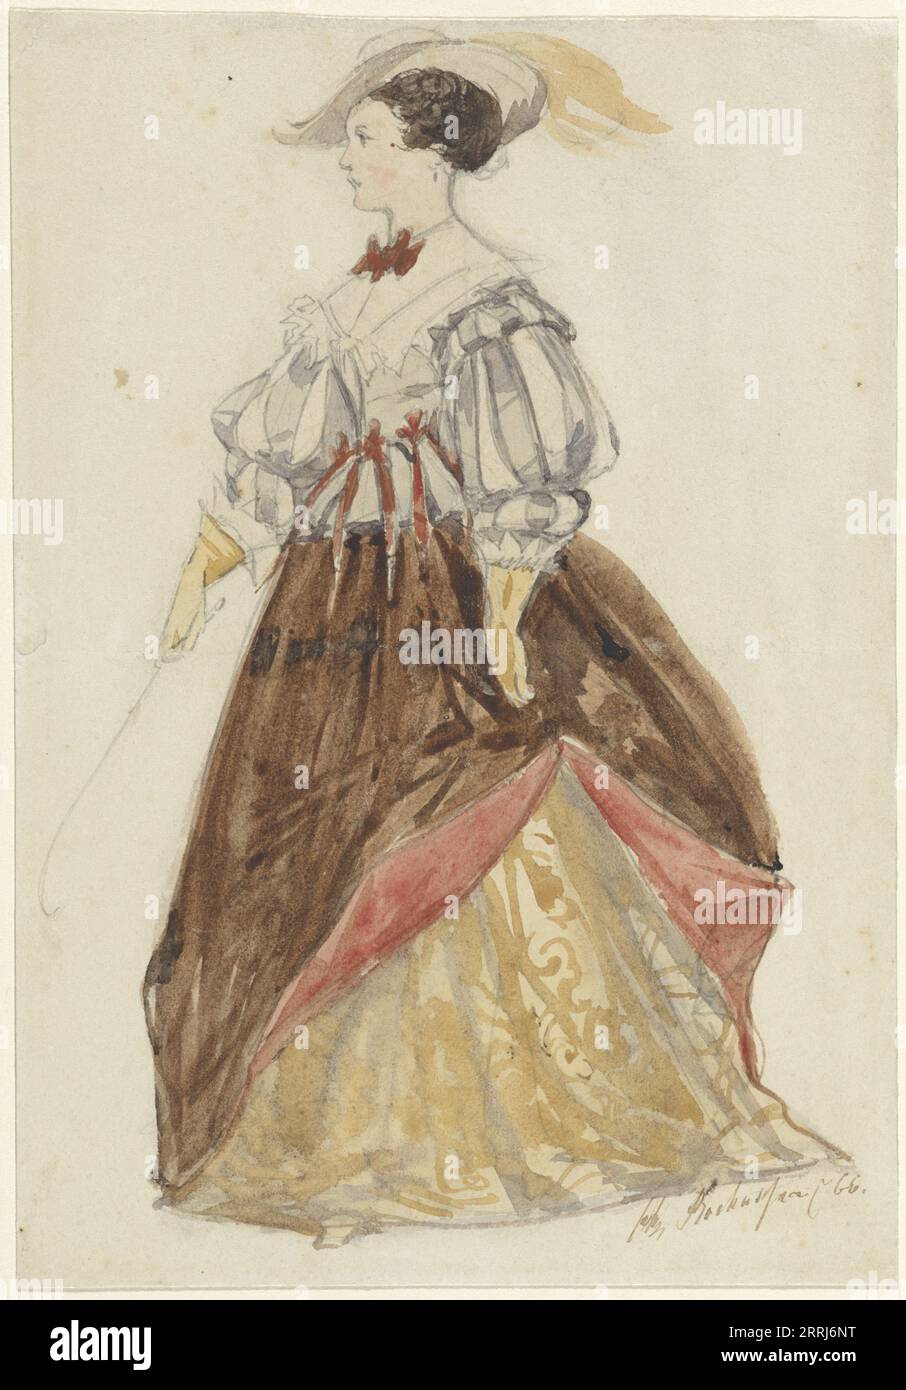 Woman in riding dress, with feathered hat, gloves, and whip in hand, 1866. Stock Photo